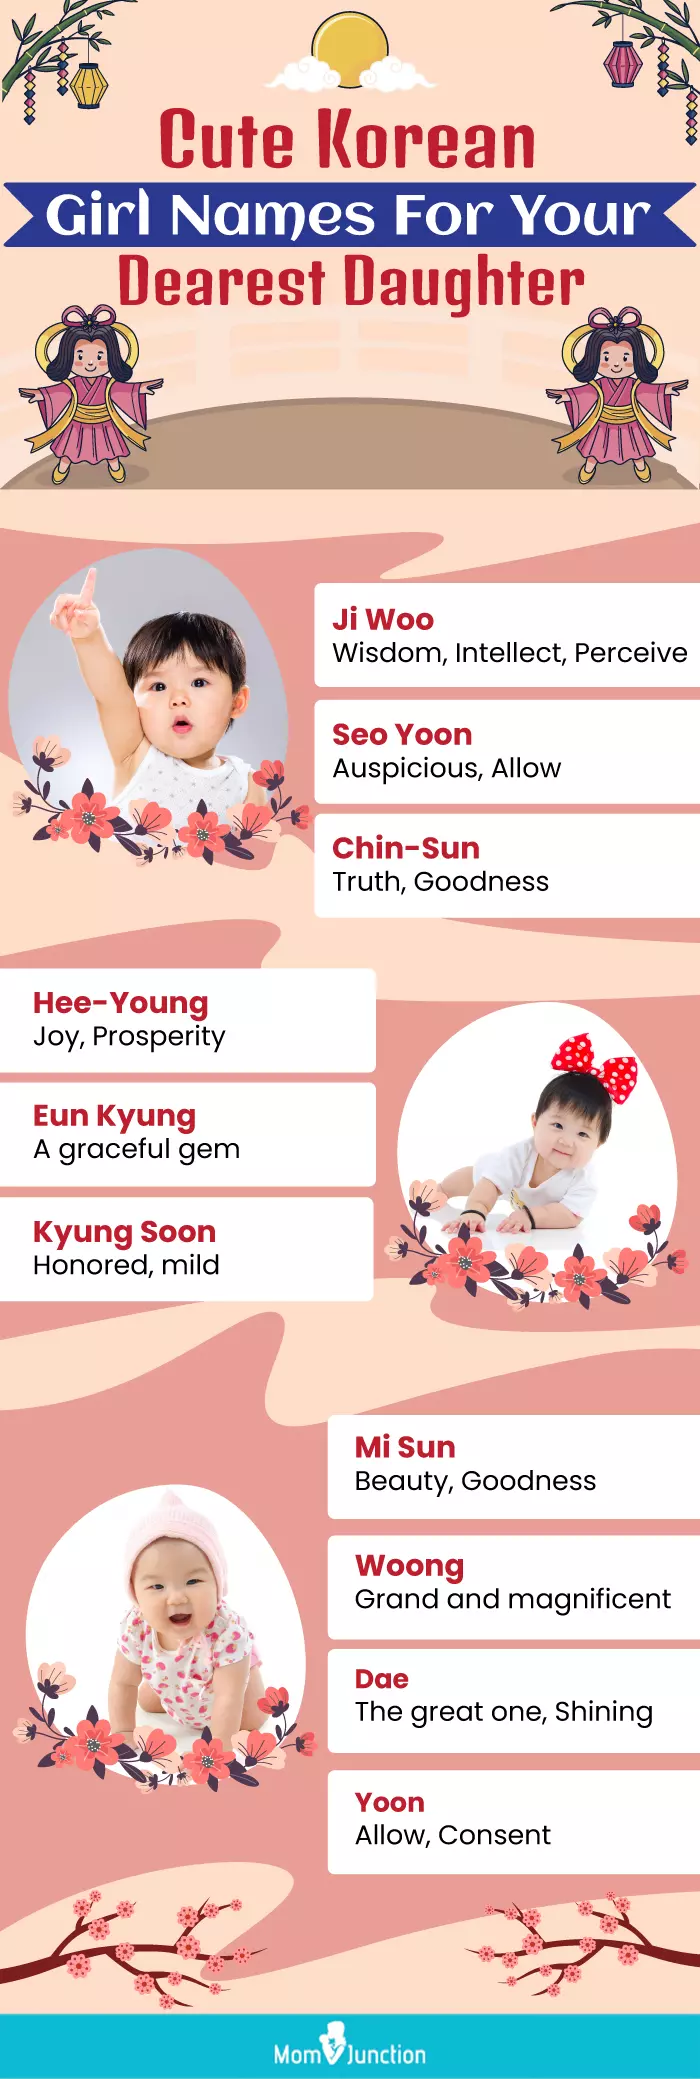 cute korean girl names for your dearest daughter (infographic)